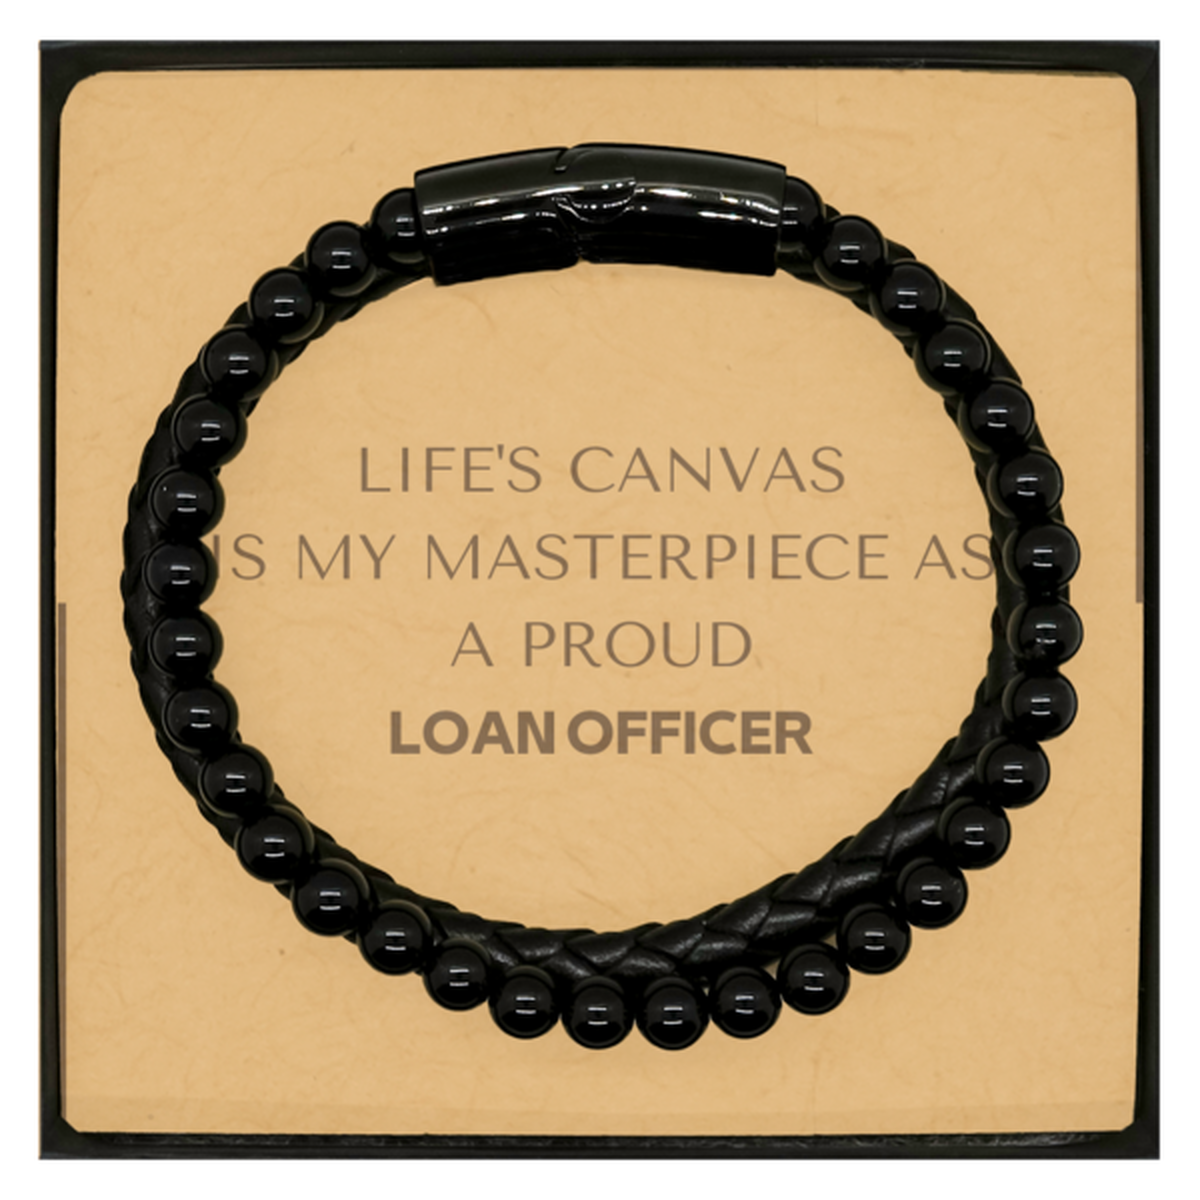 Proud Loan Officer Gifts, Life's canvas is my masterpiece, Epic Birthday Christmas Unique Stone Leather Bracelets For Loan Officer, Coworkers, Men, Women, Friends